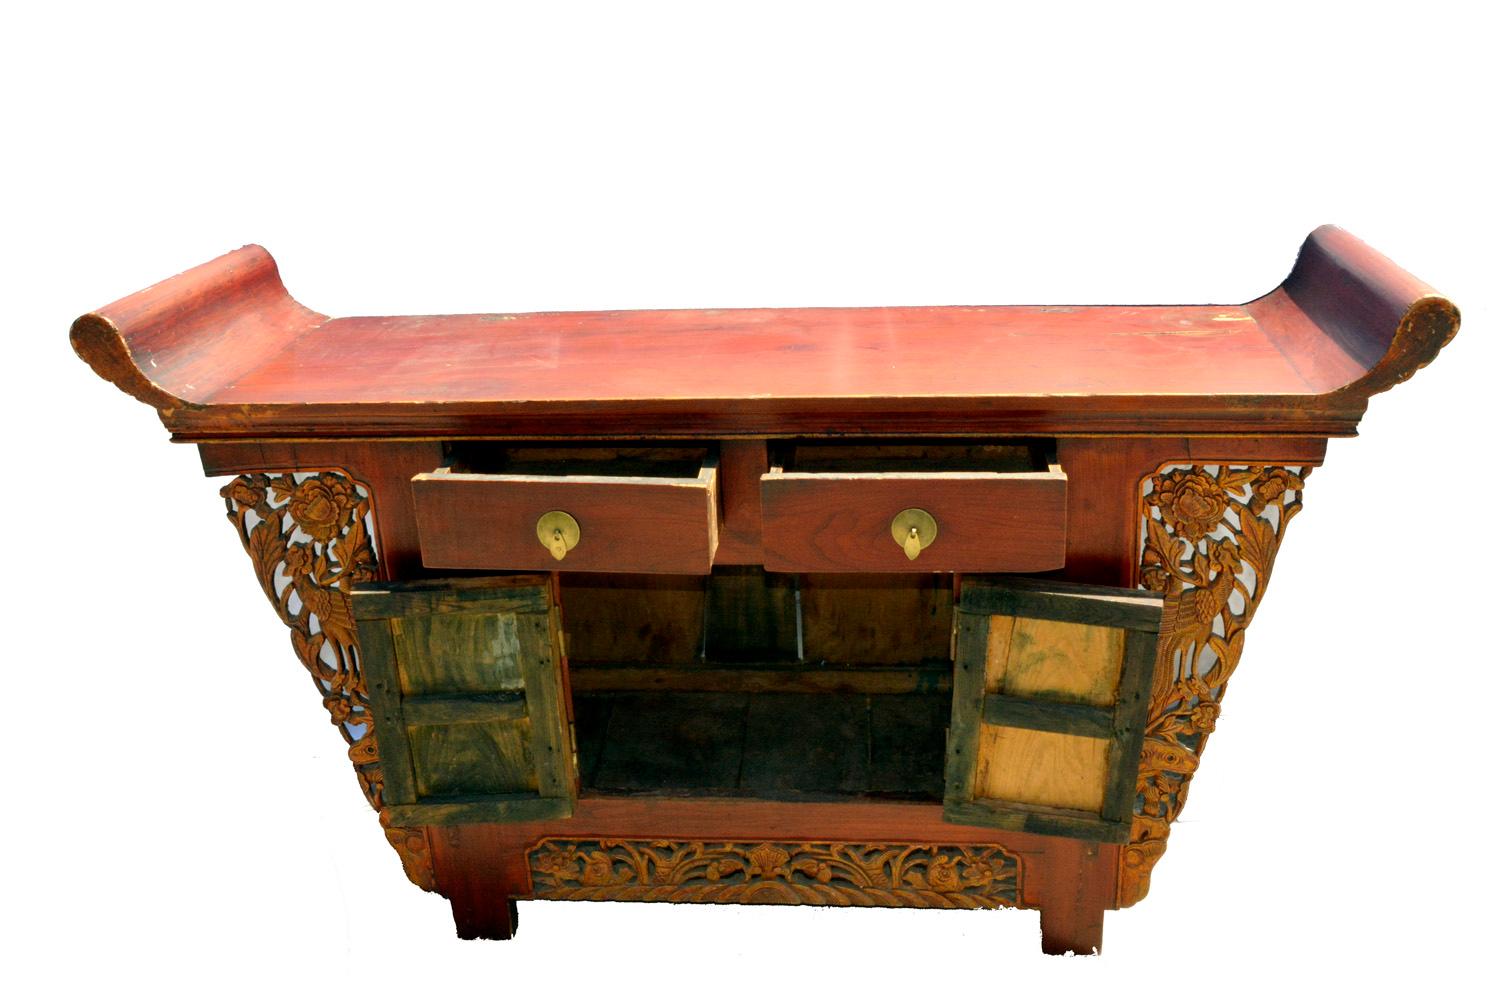 Large Antique Chinese Hardwood red lacquered highly carved coffer table

Item description: Here we are offering an original antique Chinese hardwood highly carved coffer table with original red lacquered finish. It's from early 20th century.